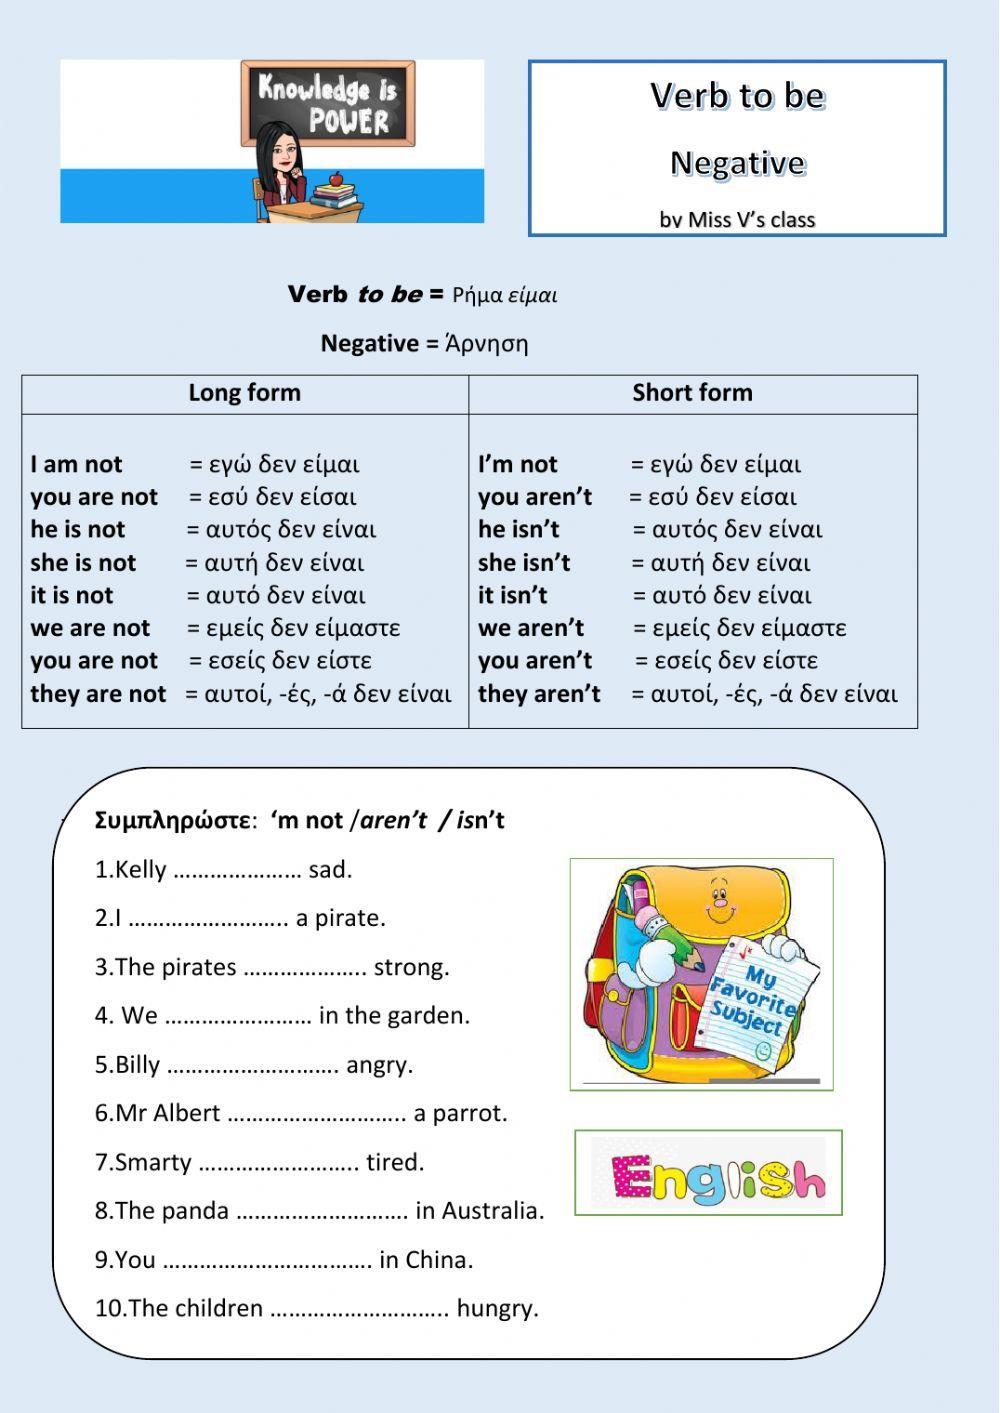 Verb to be Negative - Long and Short form worksheet